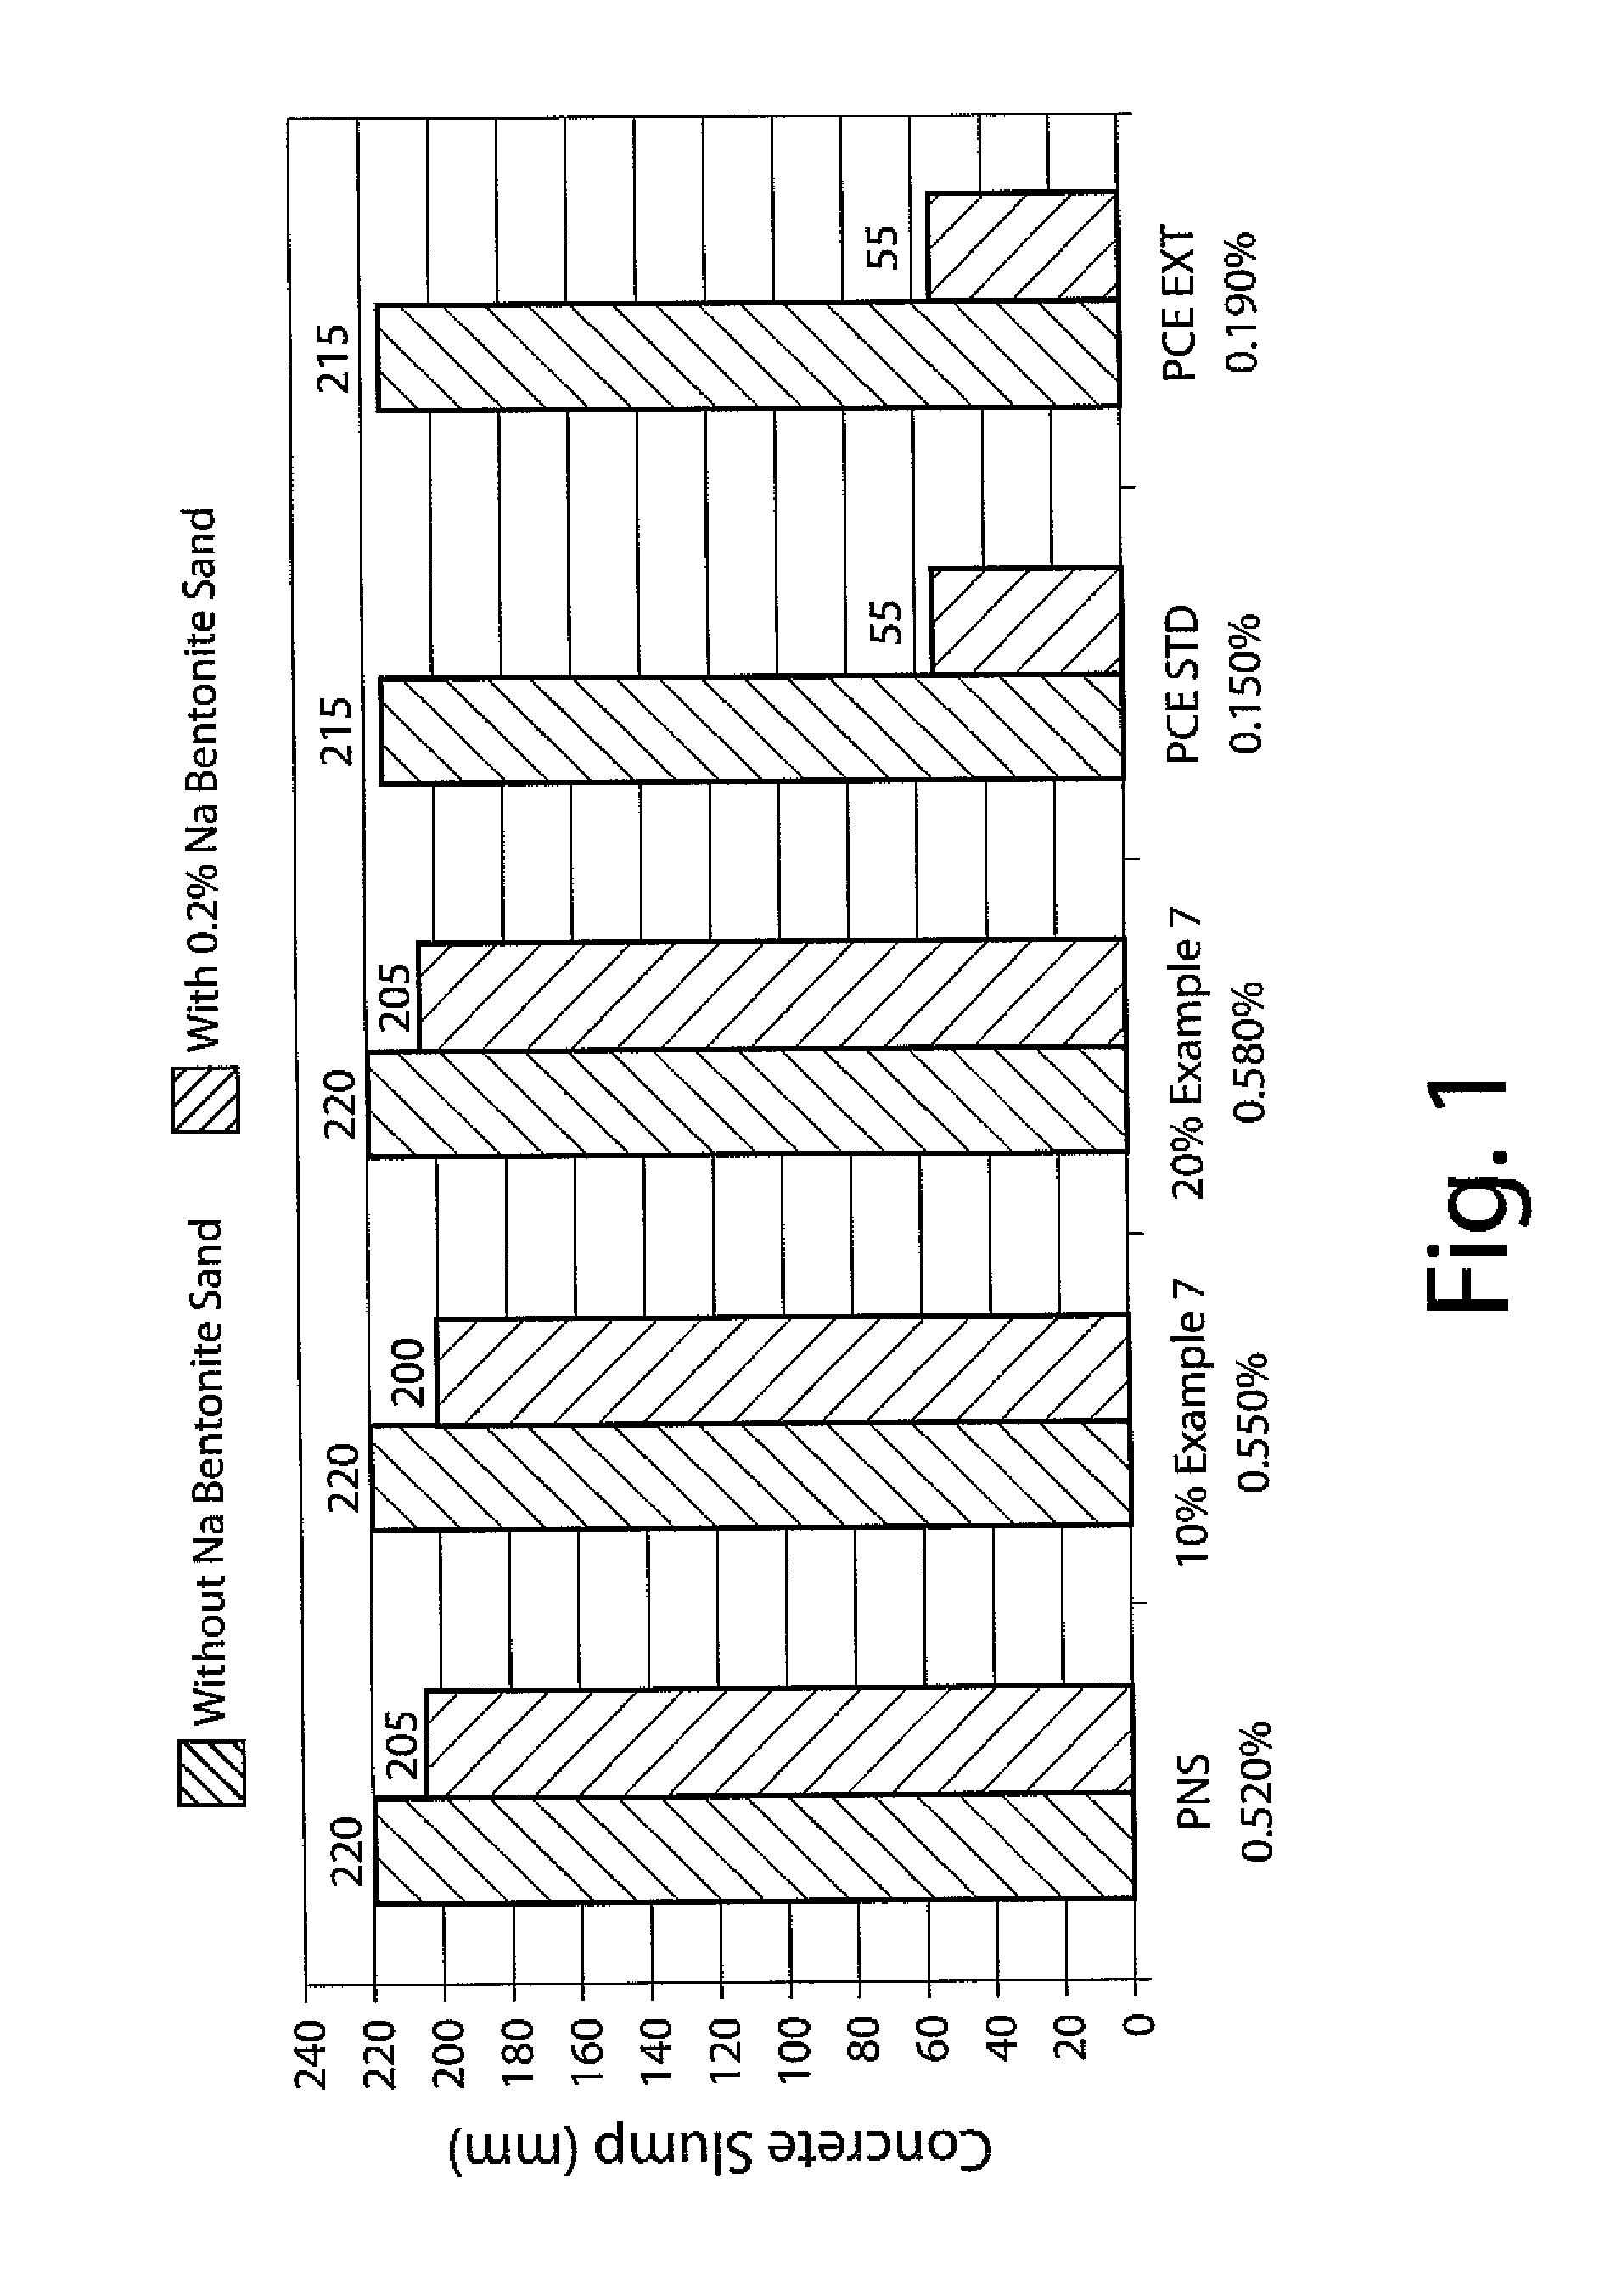 Slump Retaining and Dispersing Agent for Hydraulic Compositions